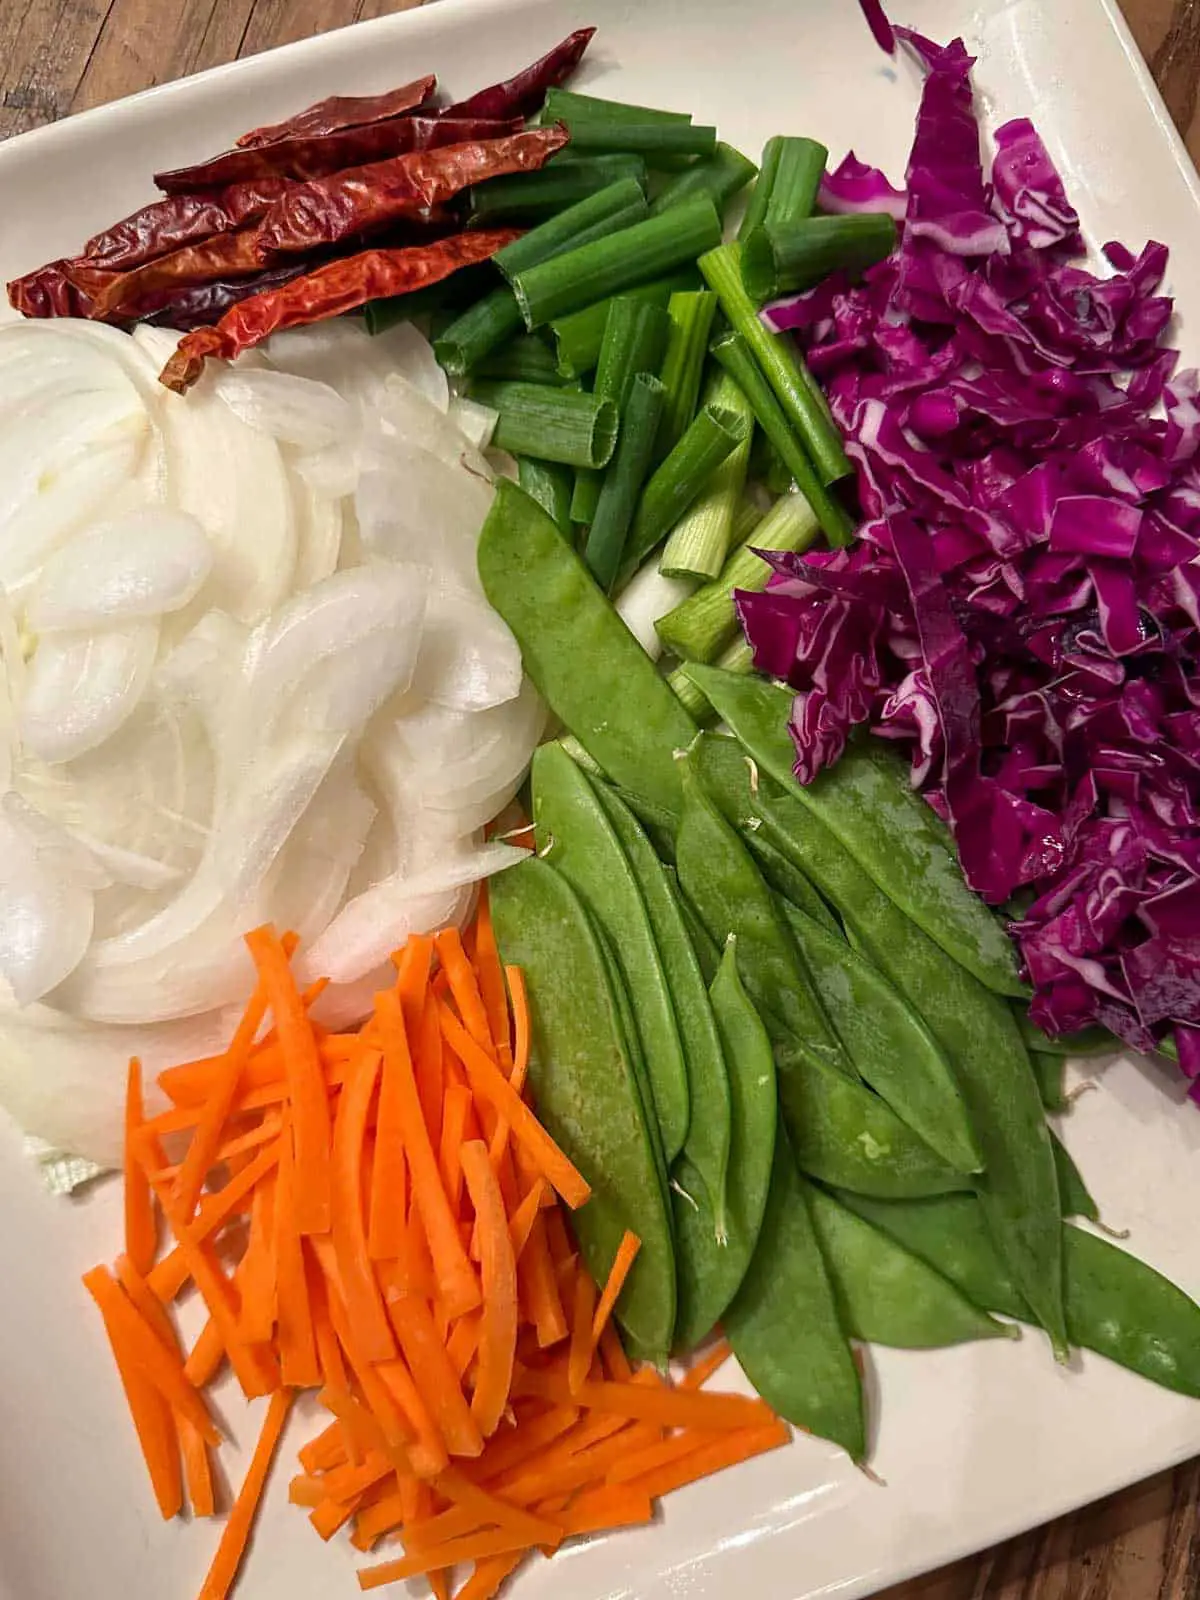 Sliced onion, julienned carrots, snow peas, sliced cabbage, sliced green onions and Asian dried chilies on a white plate.